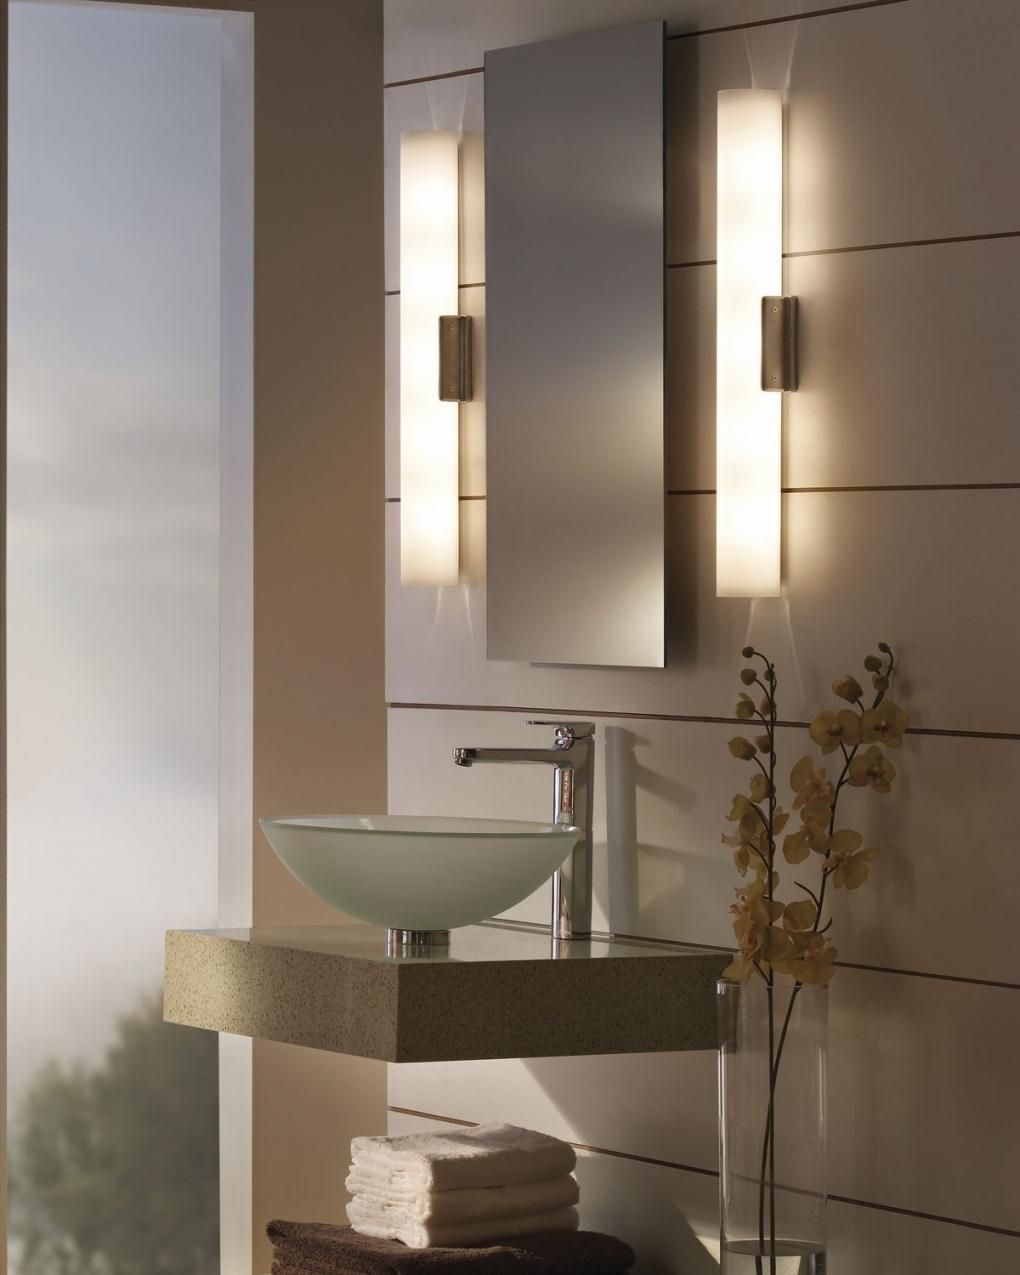 Collection In Bathroom Mirror Lighting Ideas With Bathroom Pertaining To Bathroom Lighting And Mirrors (View 13 of 20)